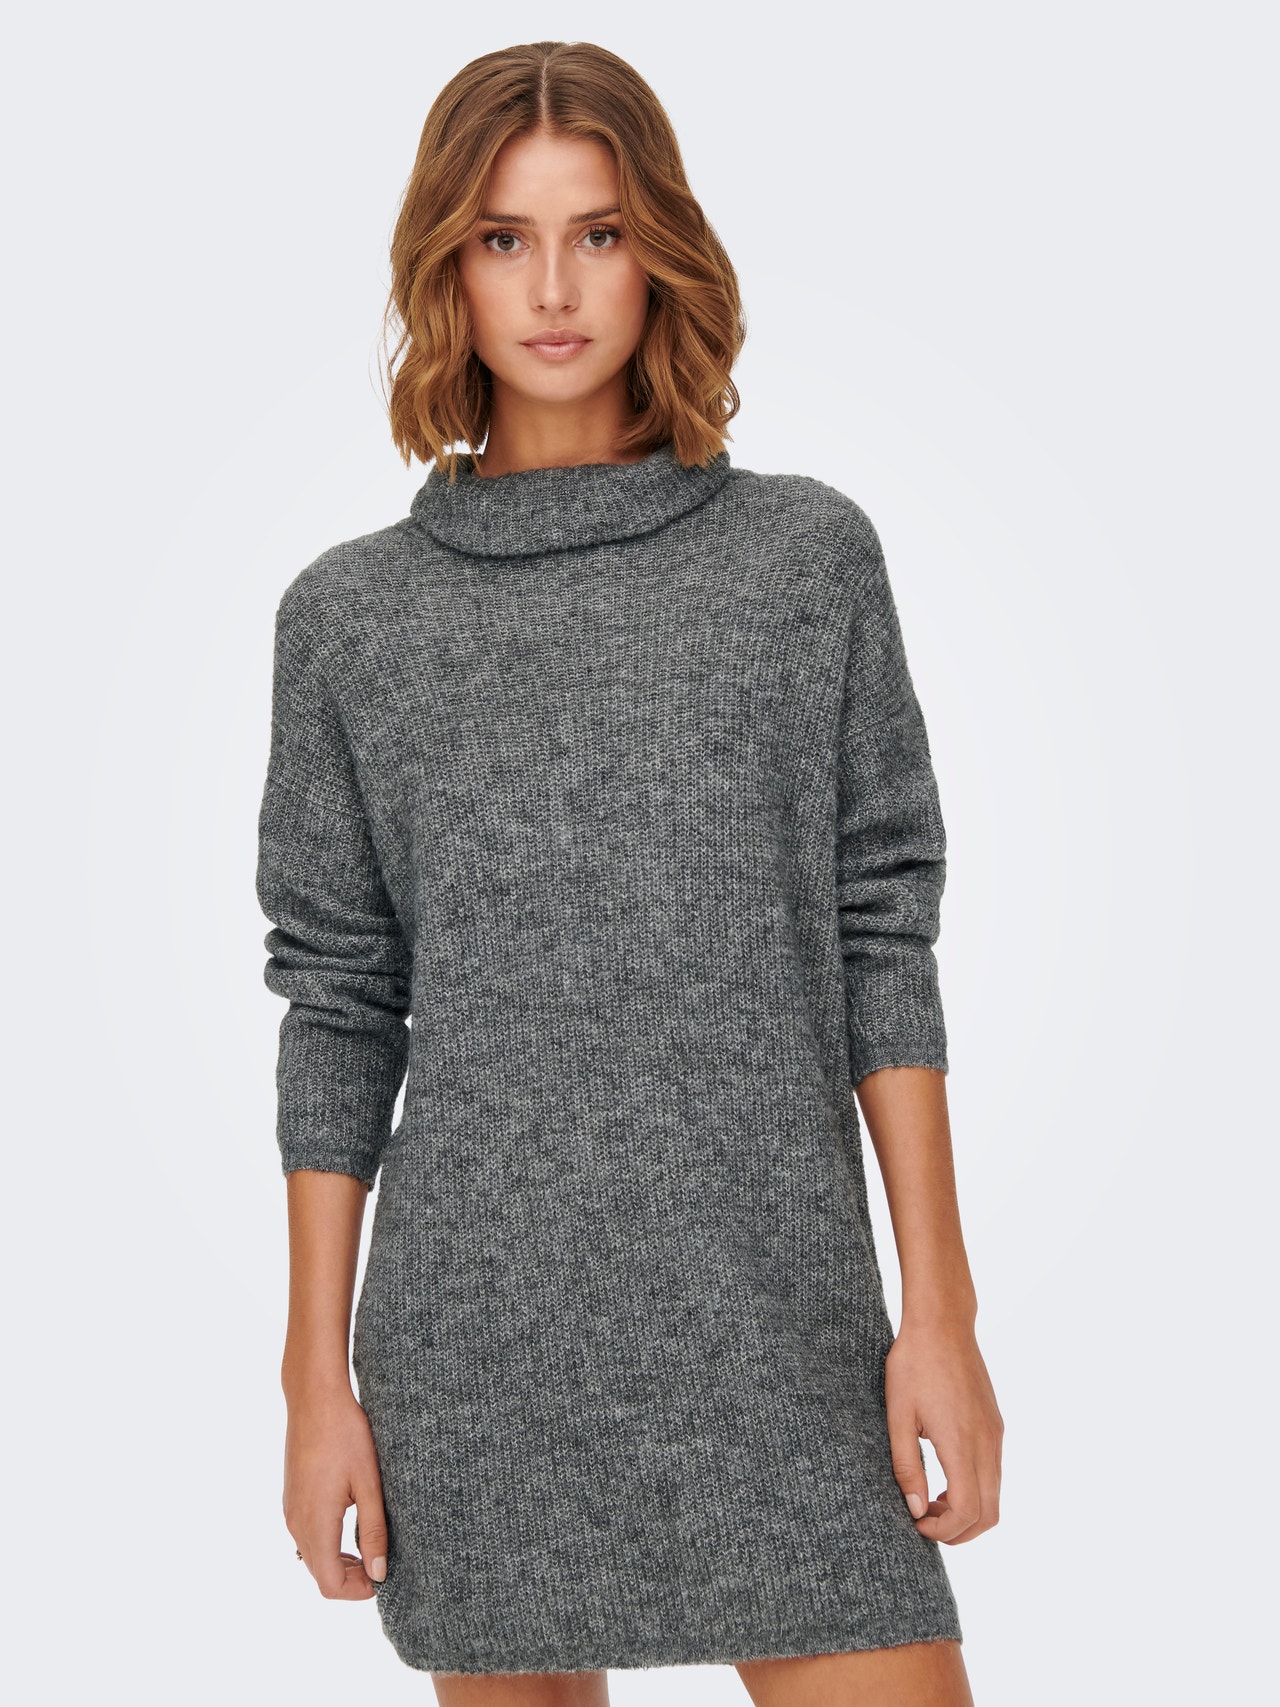 Roll neck | del ONLY® 30 scontato Dress Knitted